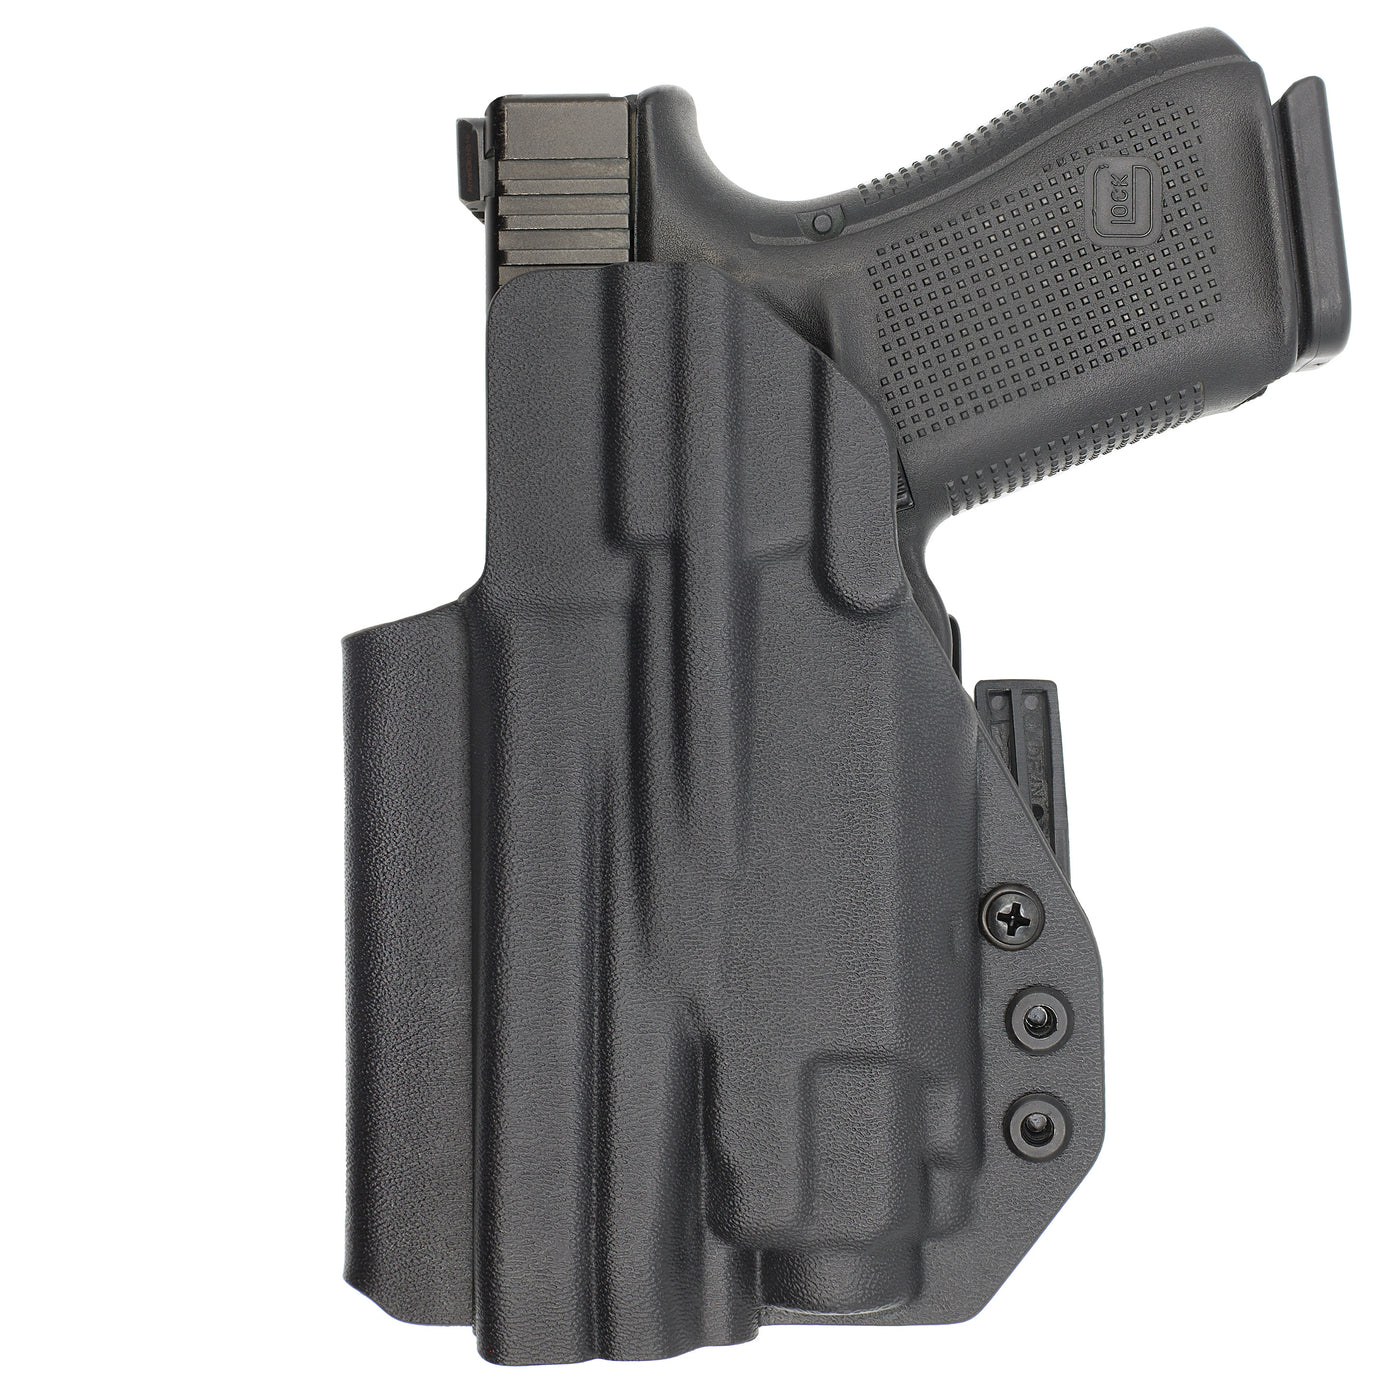 C&G Holsters custom IWB ALPHA UPGRADE tactical CZ P10/c streamlight TLR8 holstered back view